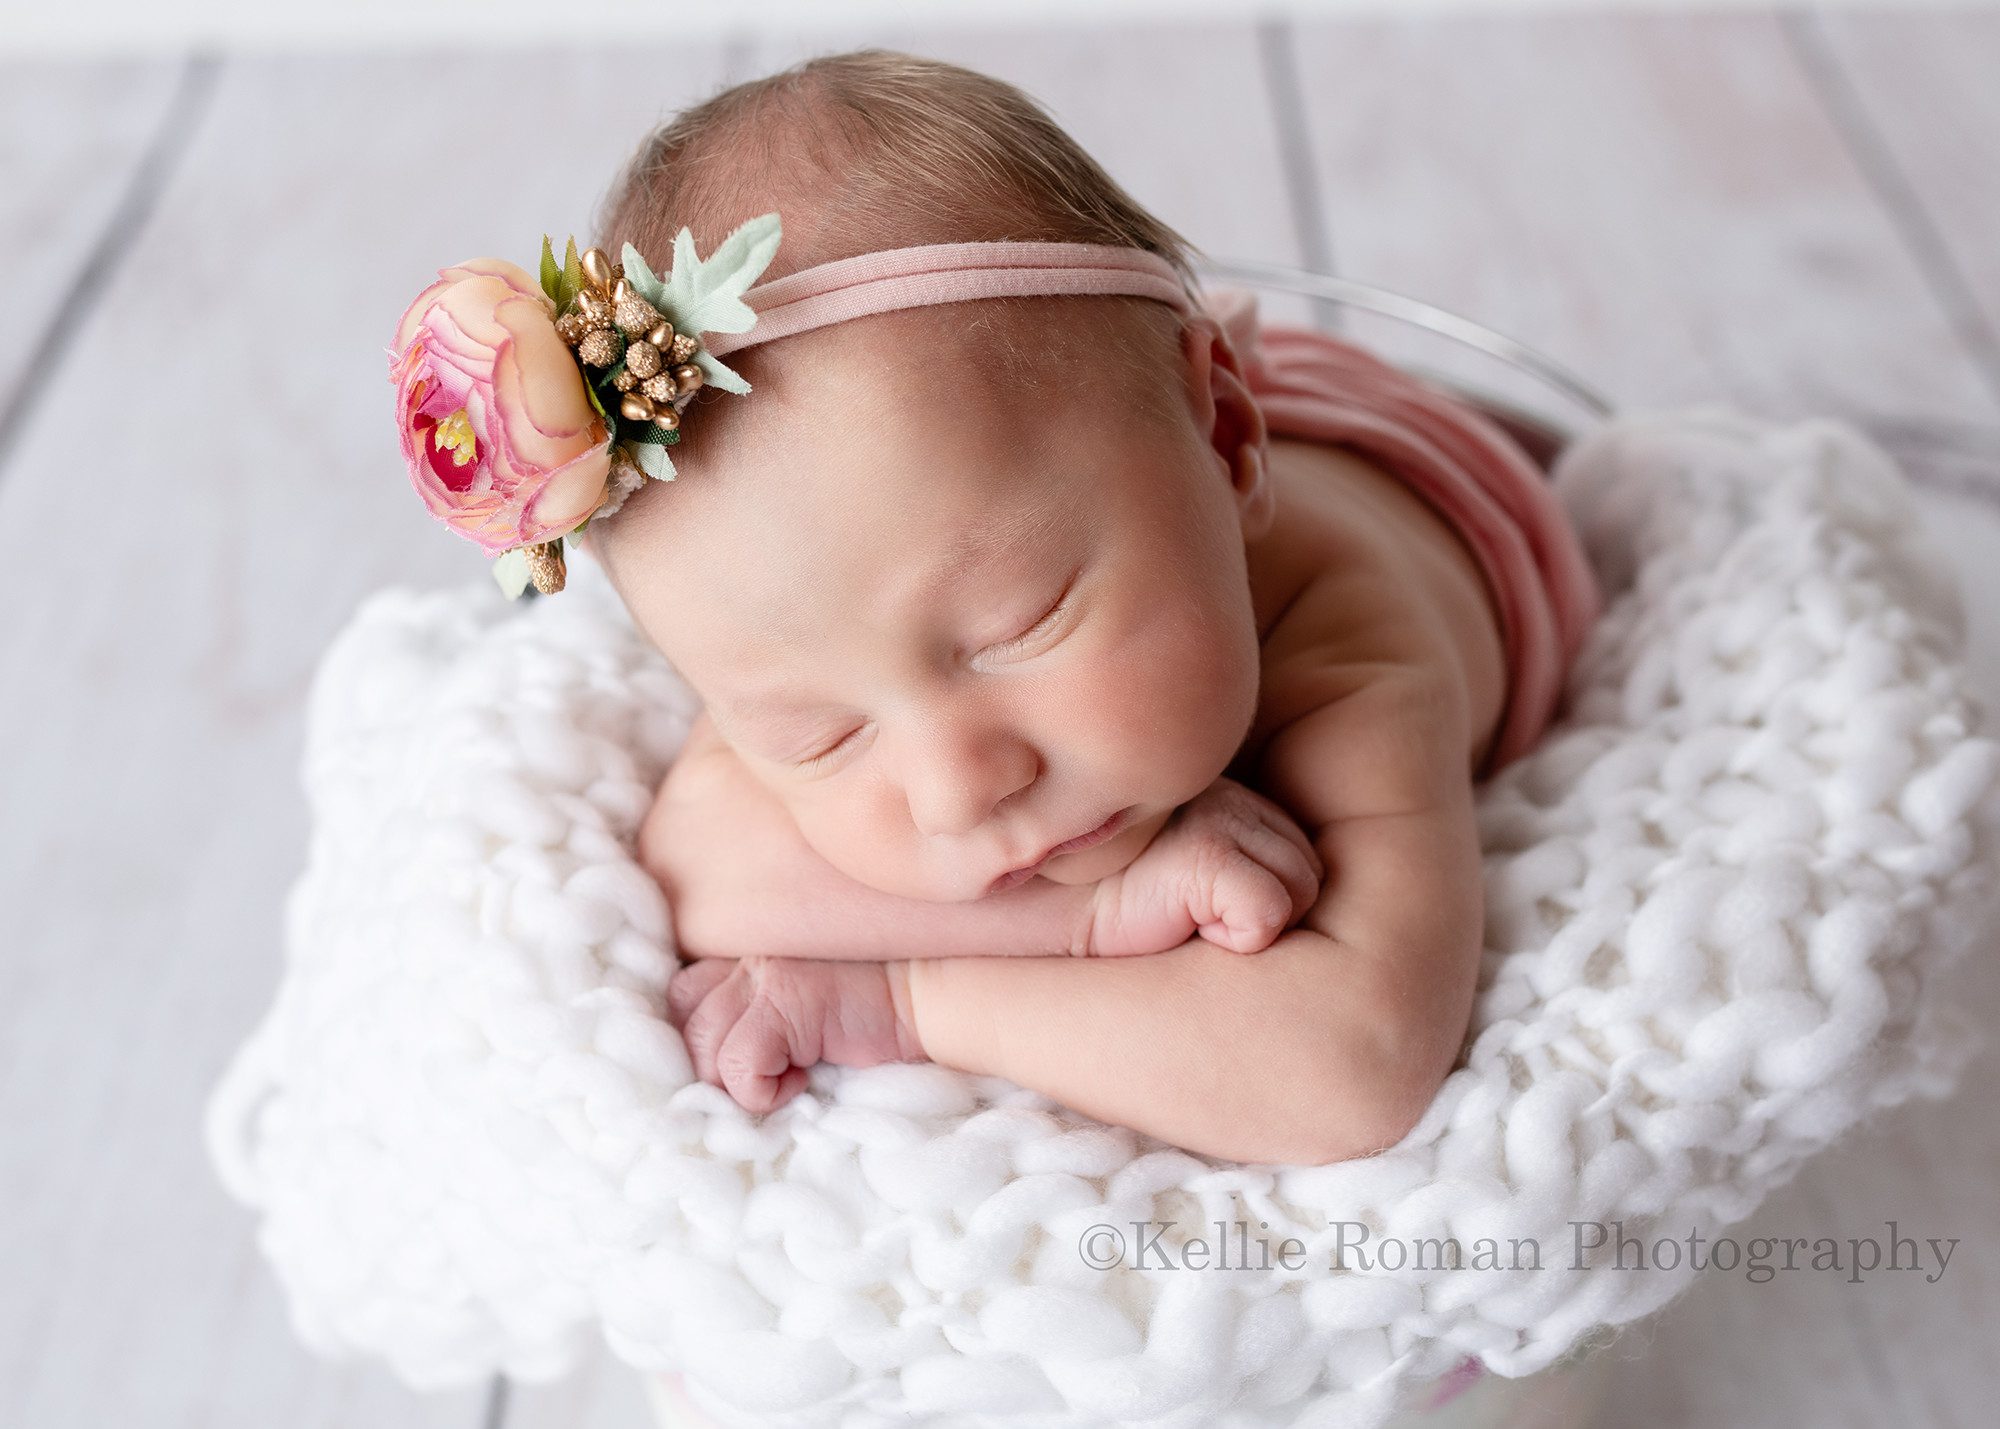 milwaukee baby whisperer a sweet baby girl in a milwaukee photographers studio is sleeping while posed upright in a bucket. She has her chin resting on her hands and is on a white knitted blanket. She has on a pink and gold flower headband.